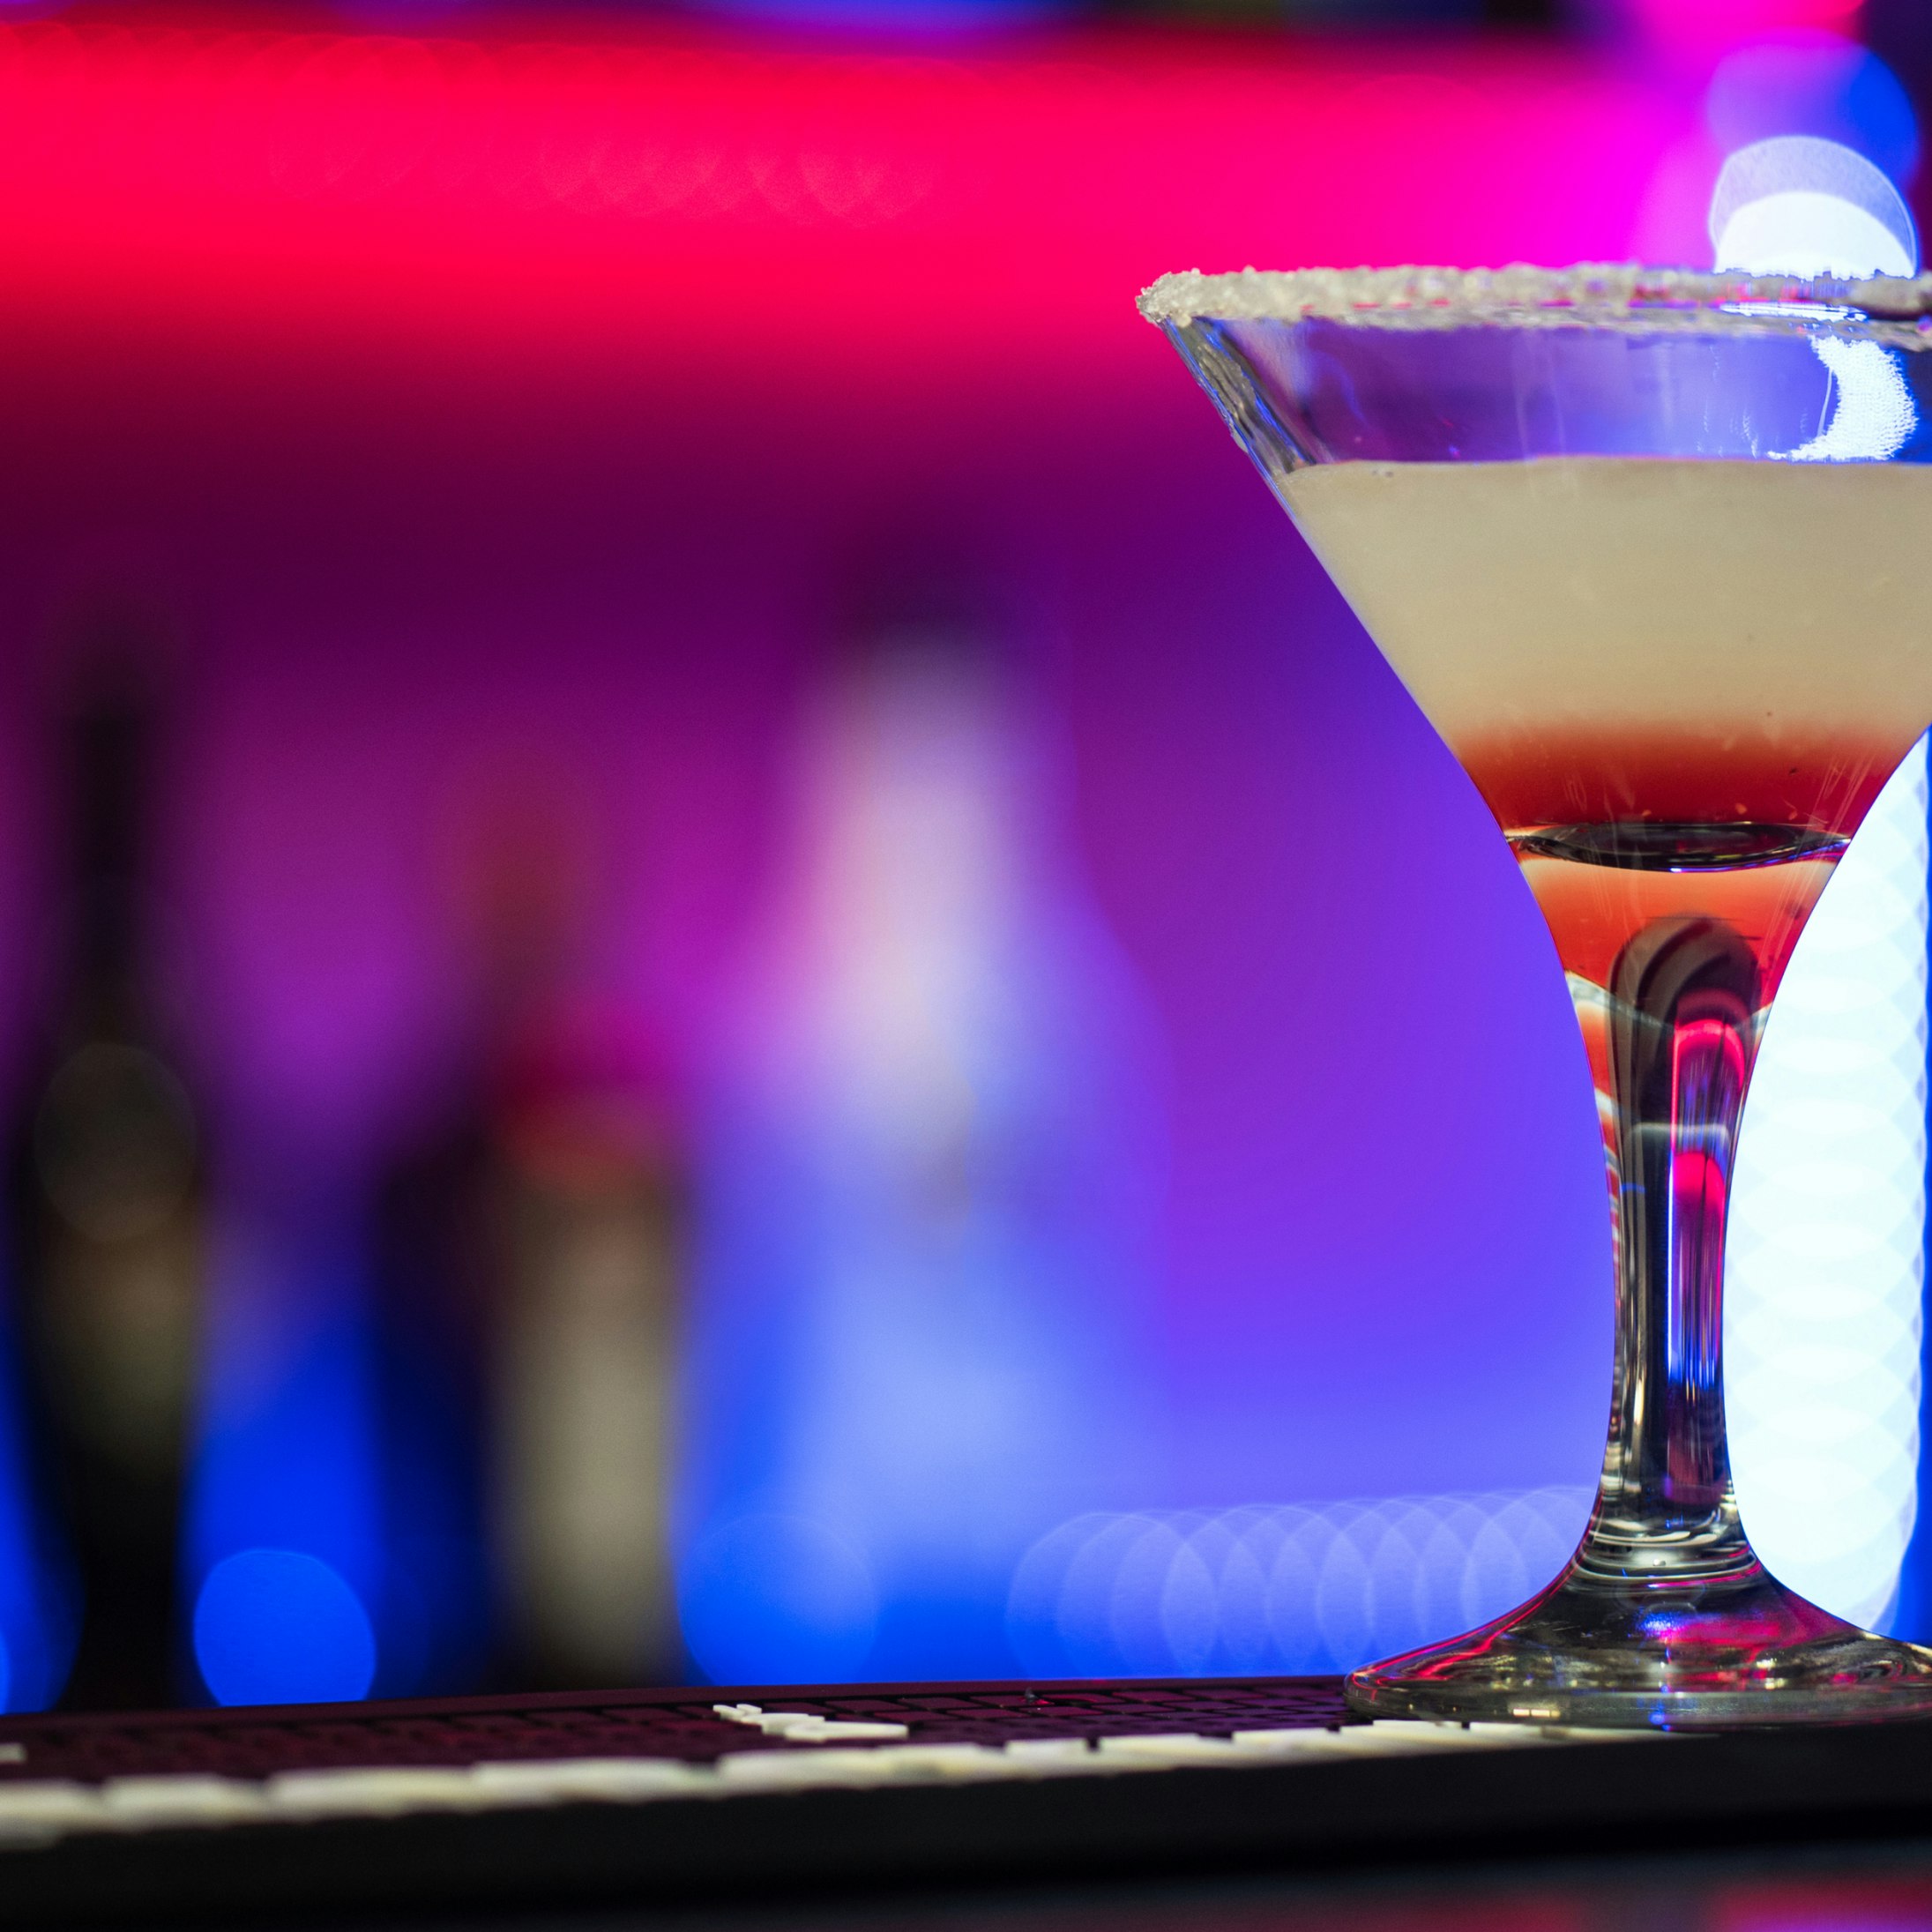 500px Photo ID: 150032167 - cocktail on the bar background